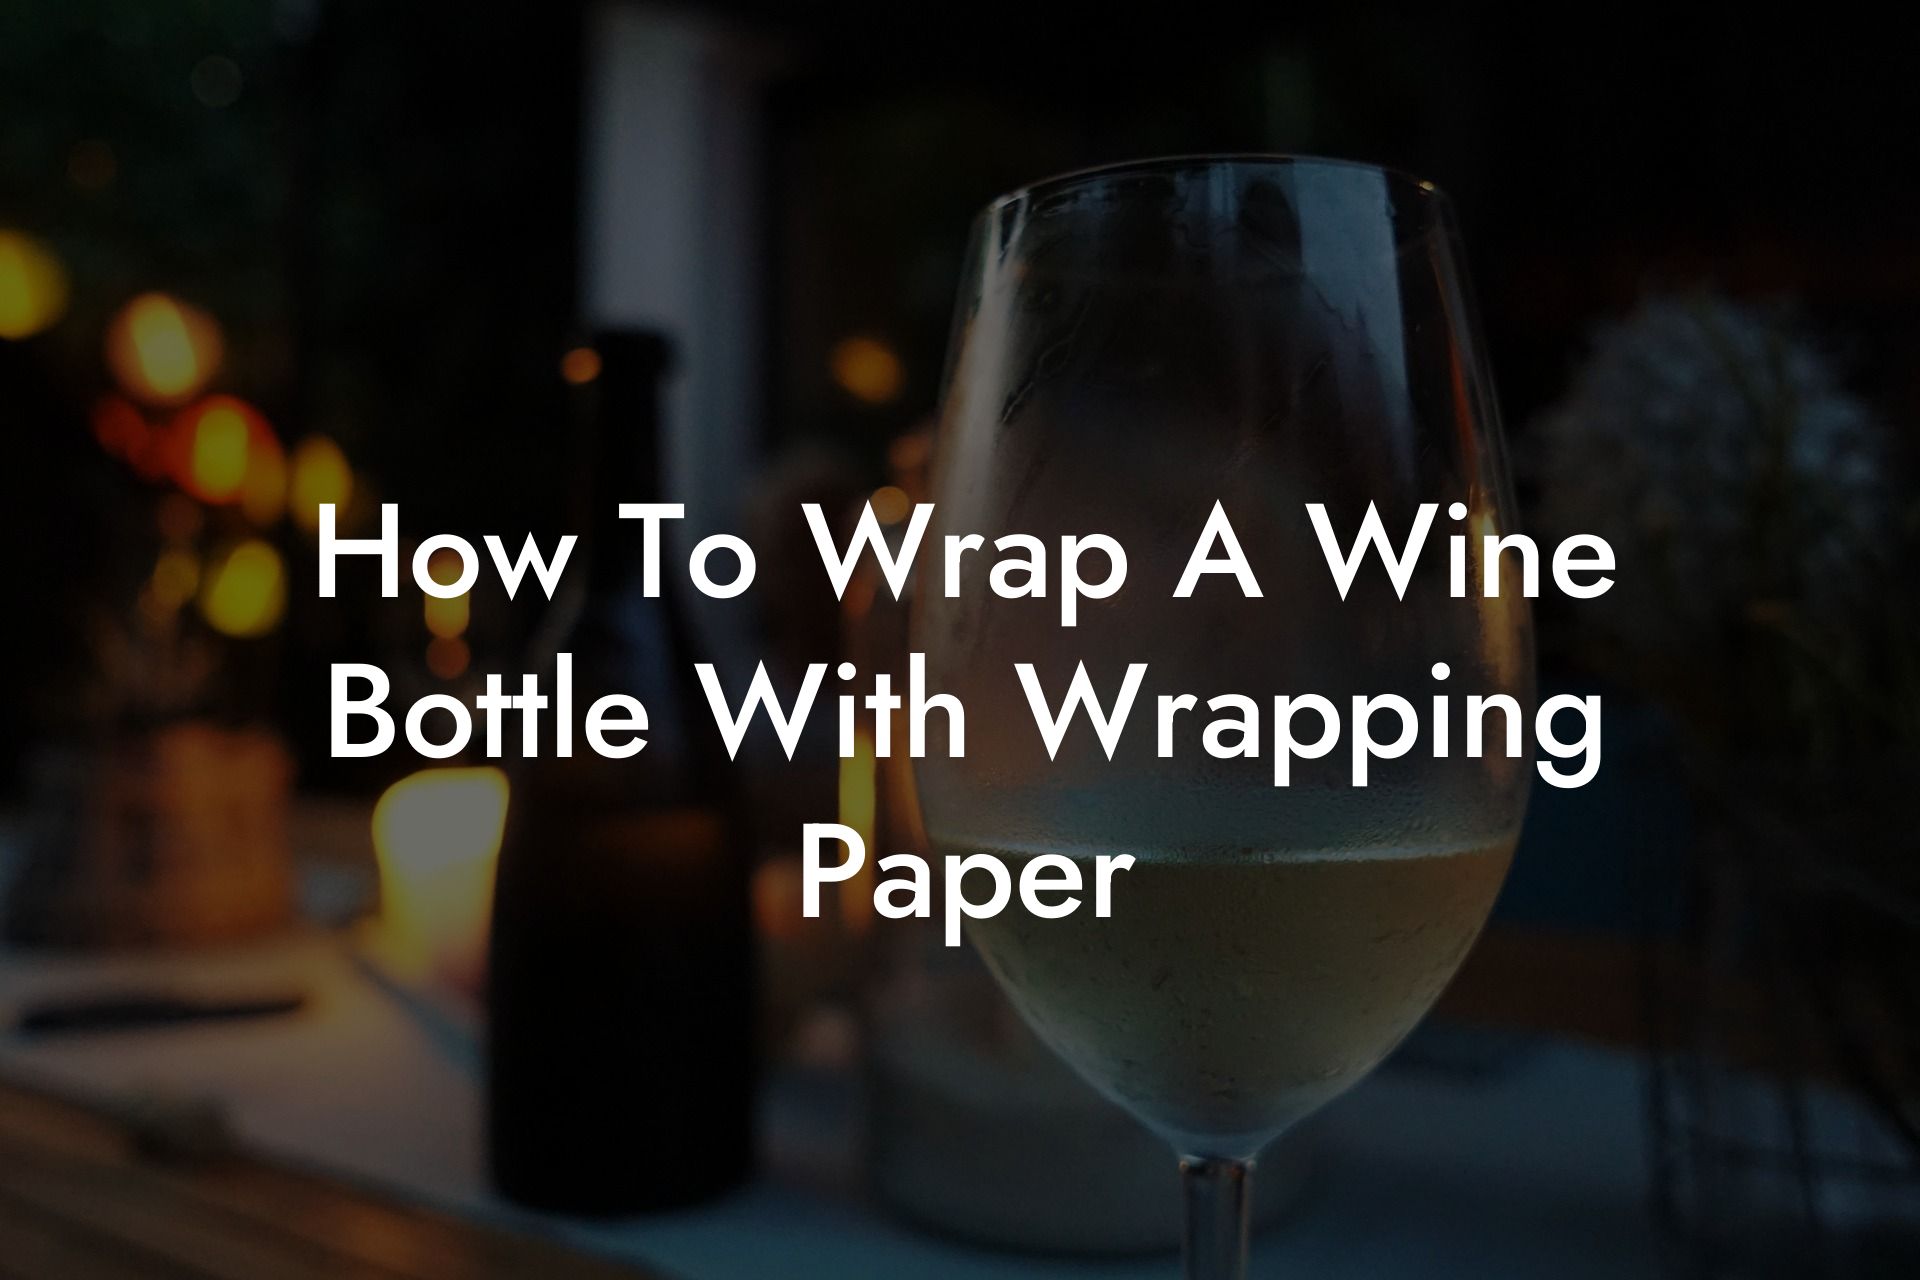 How To Wrap A Wine Bottle With Wrapping Paper